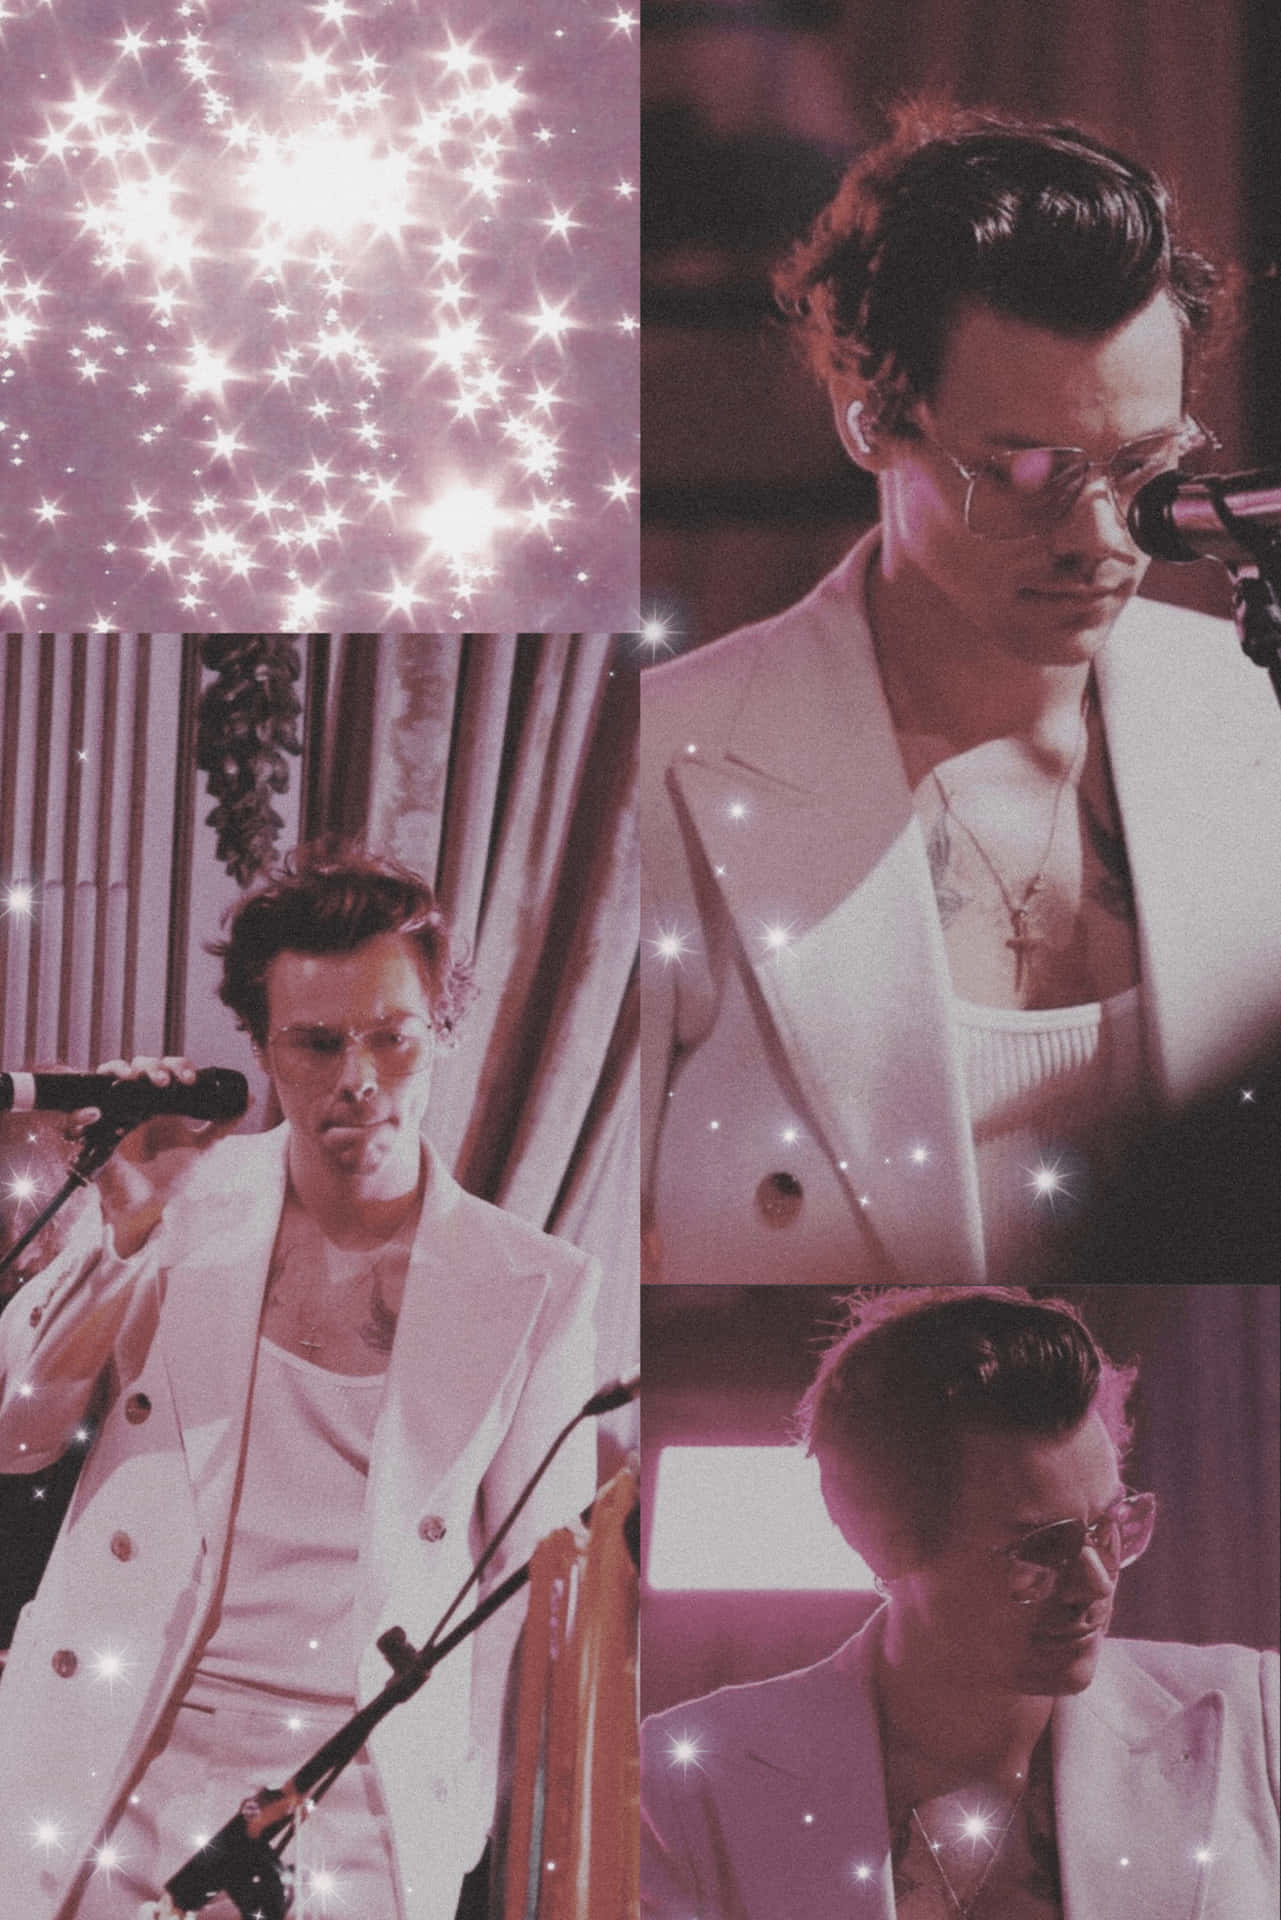 Harry Styles In His Album Cover Wallpaper